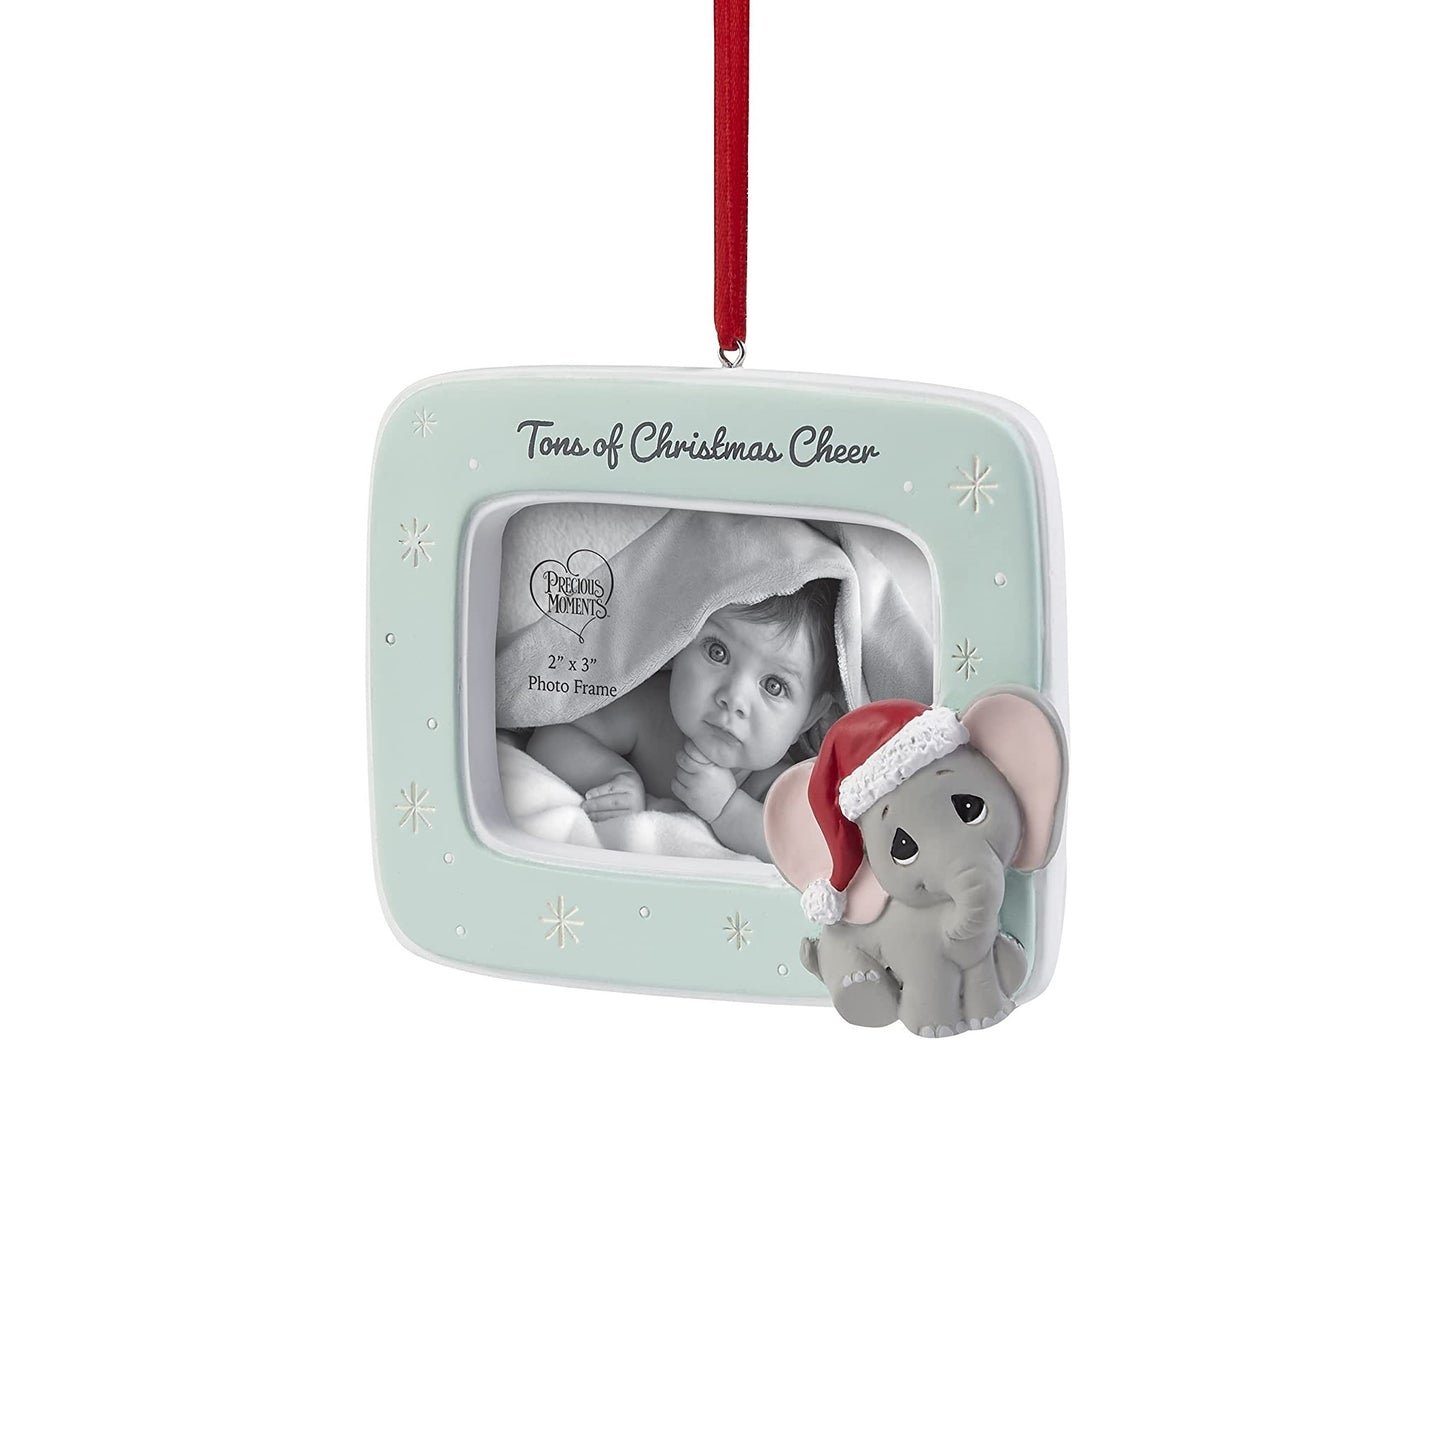 Precious Moments "Tons of Christmas Cheer" Photo Frame Ornament